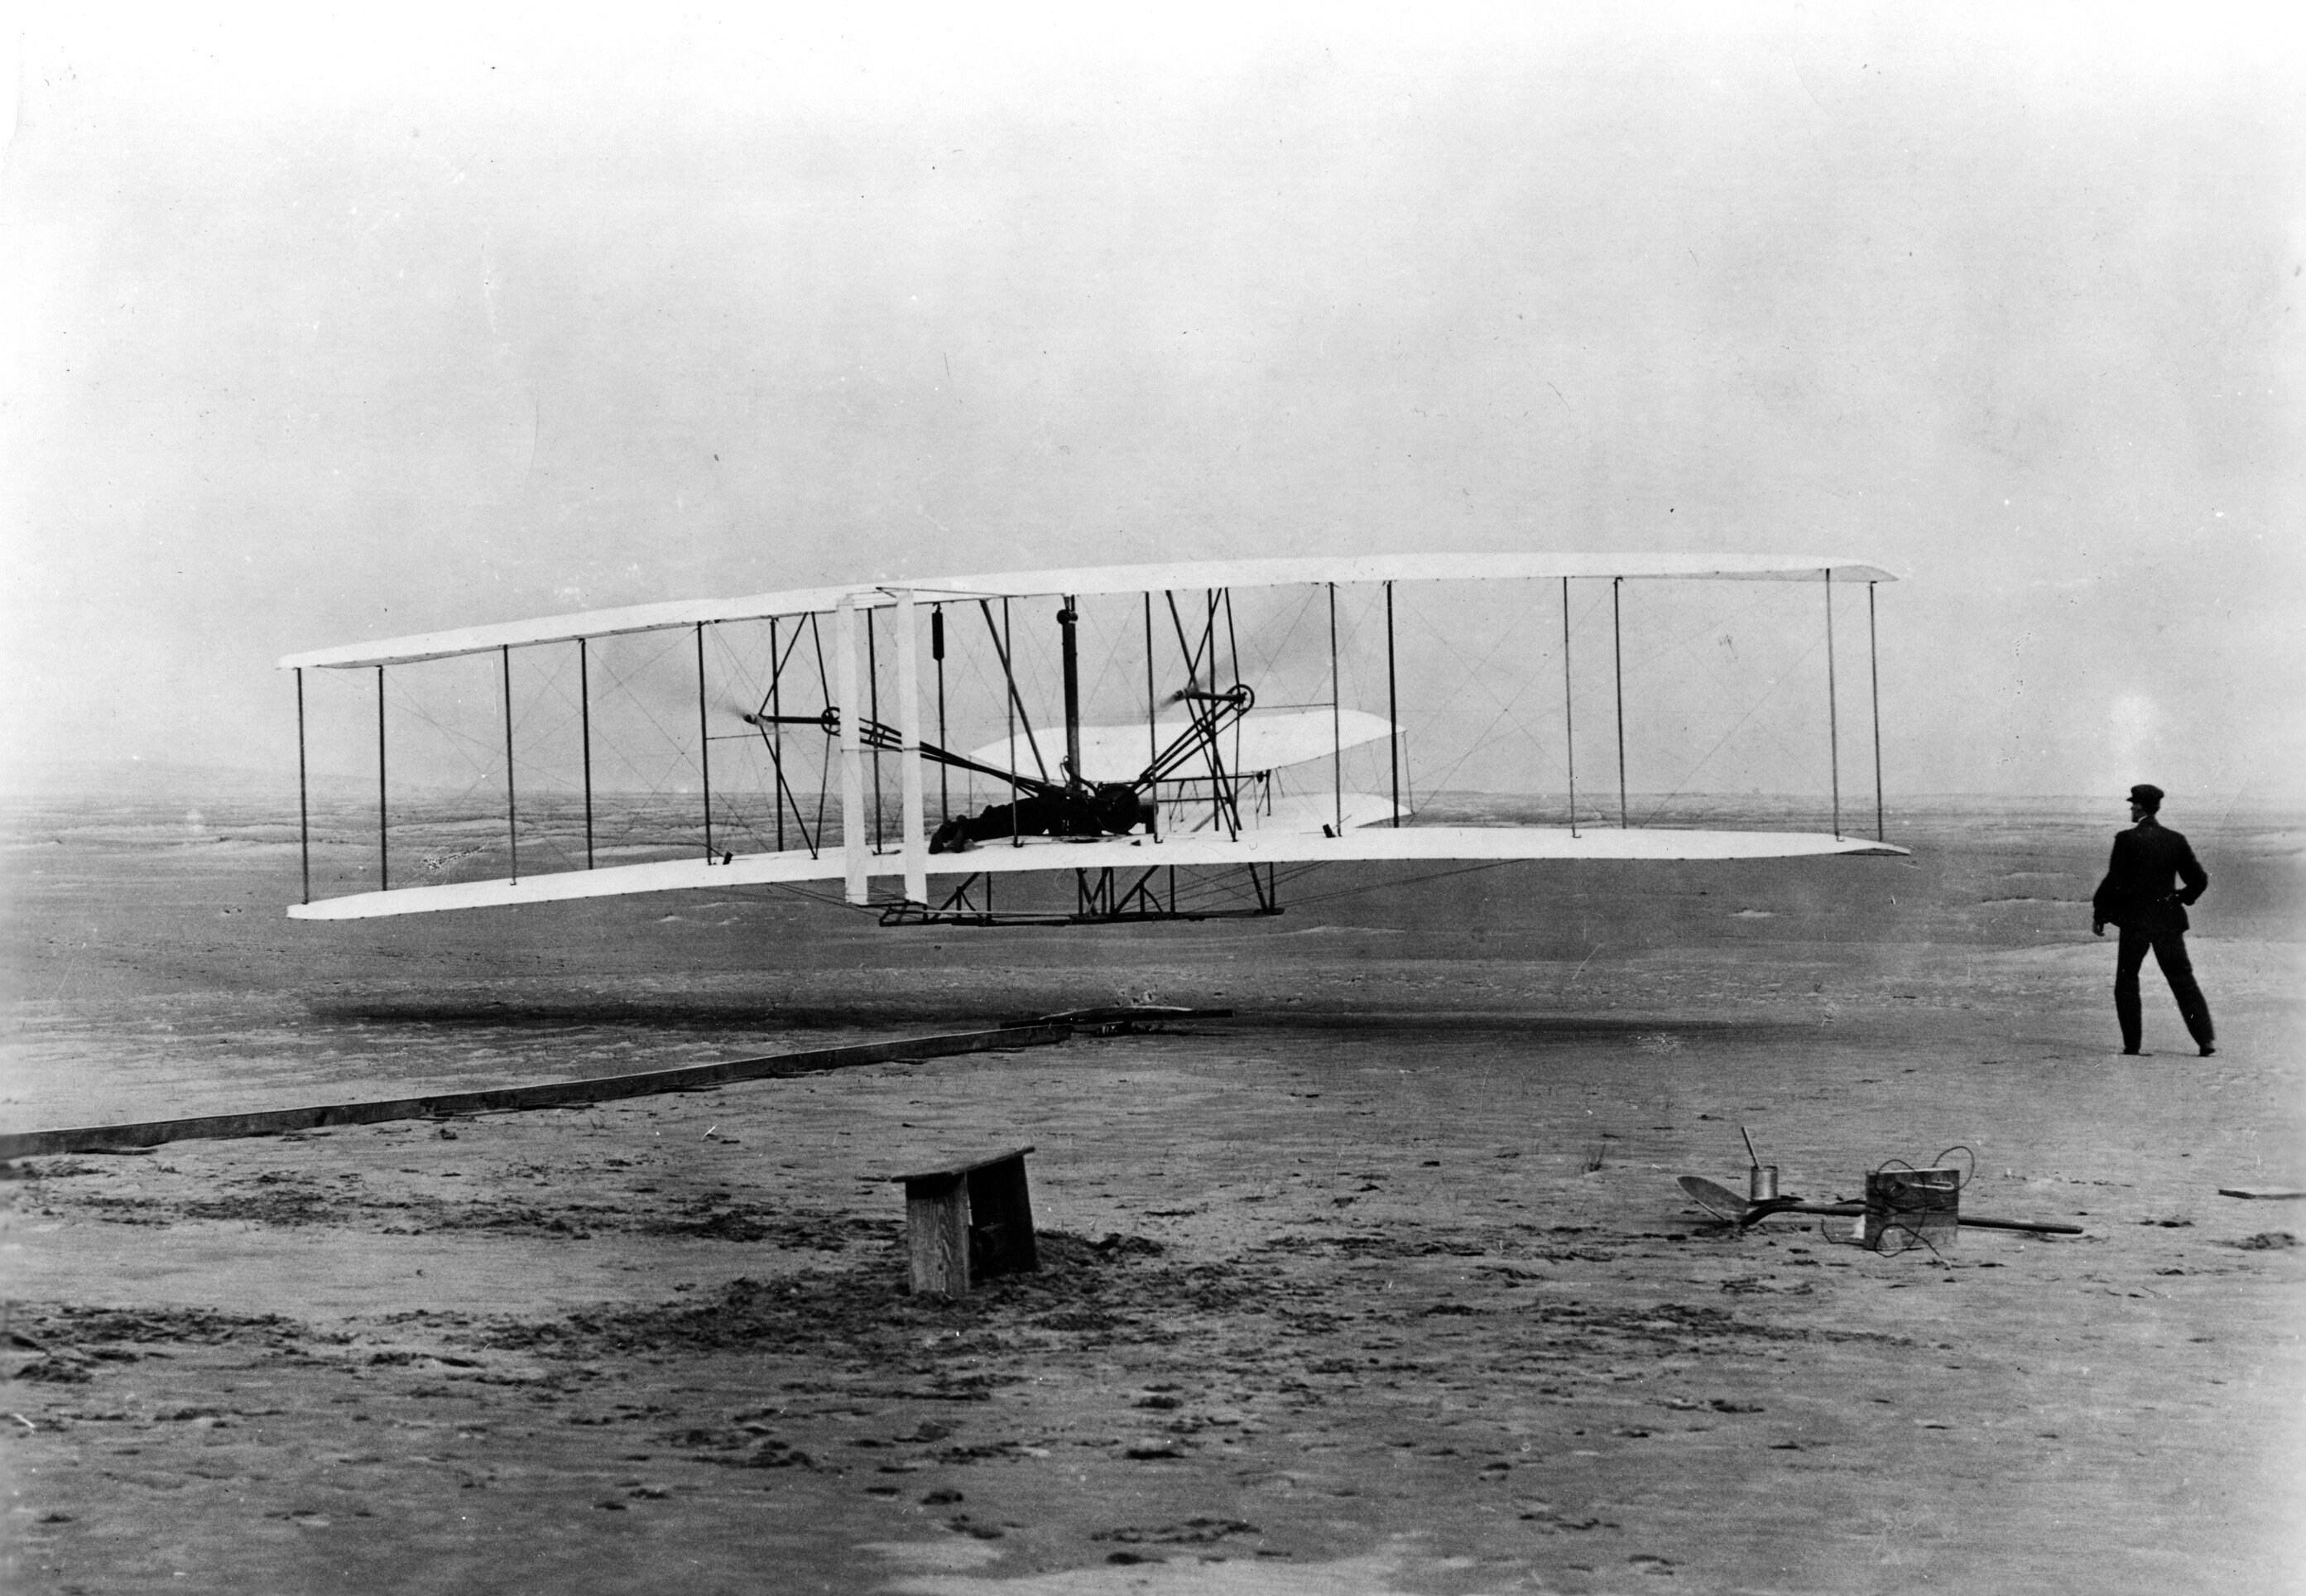 Orville Wright is at the controls as the Wright Flyer takes off under its own power in Kitty Hawk, NC, on December 17, 1903